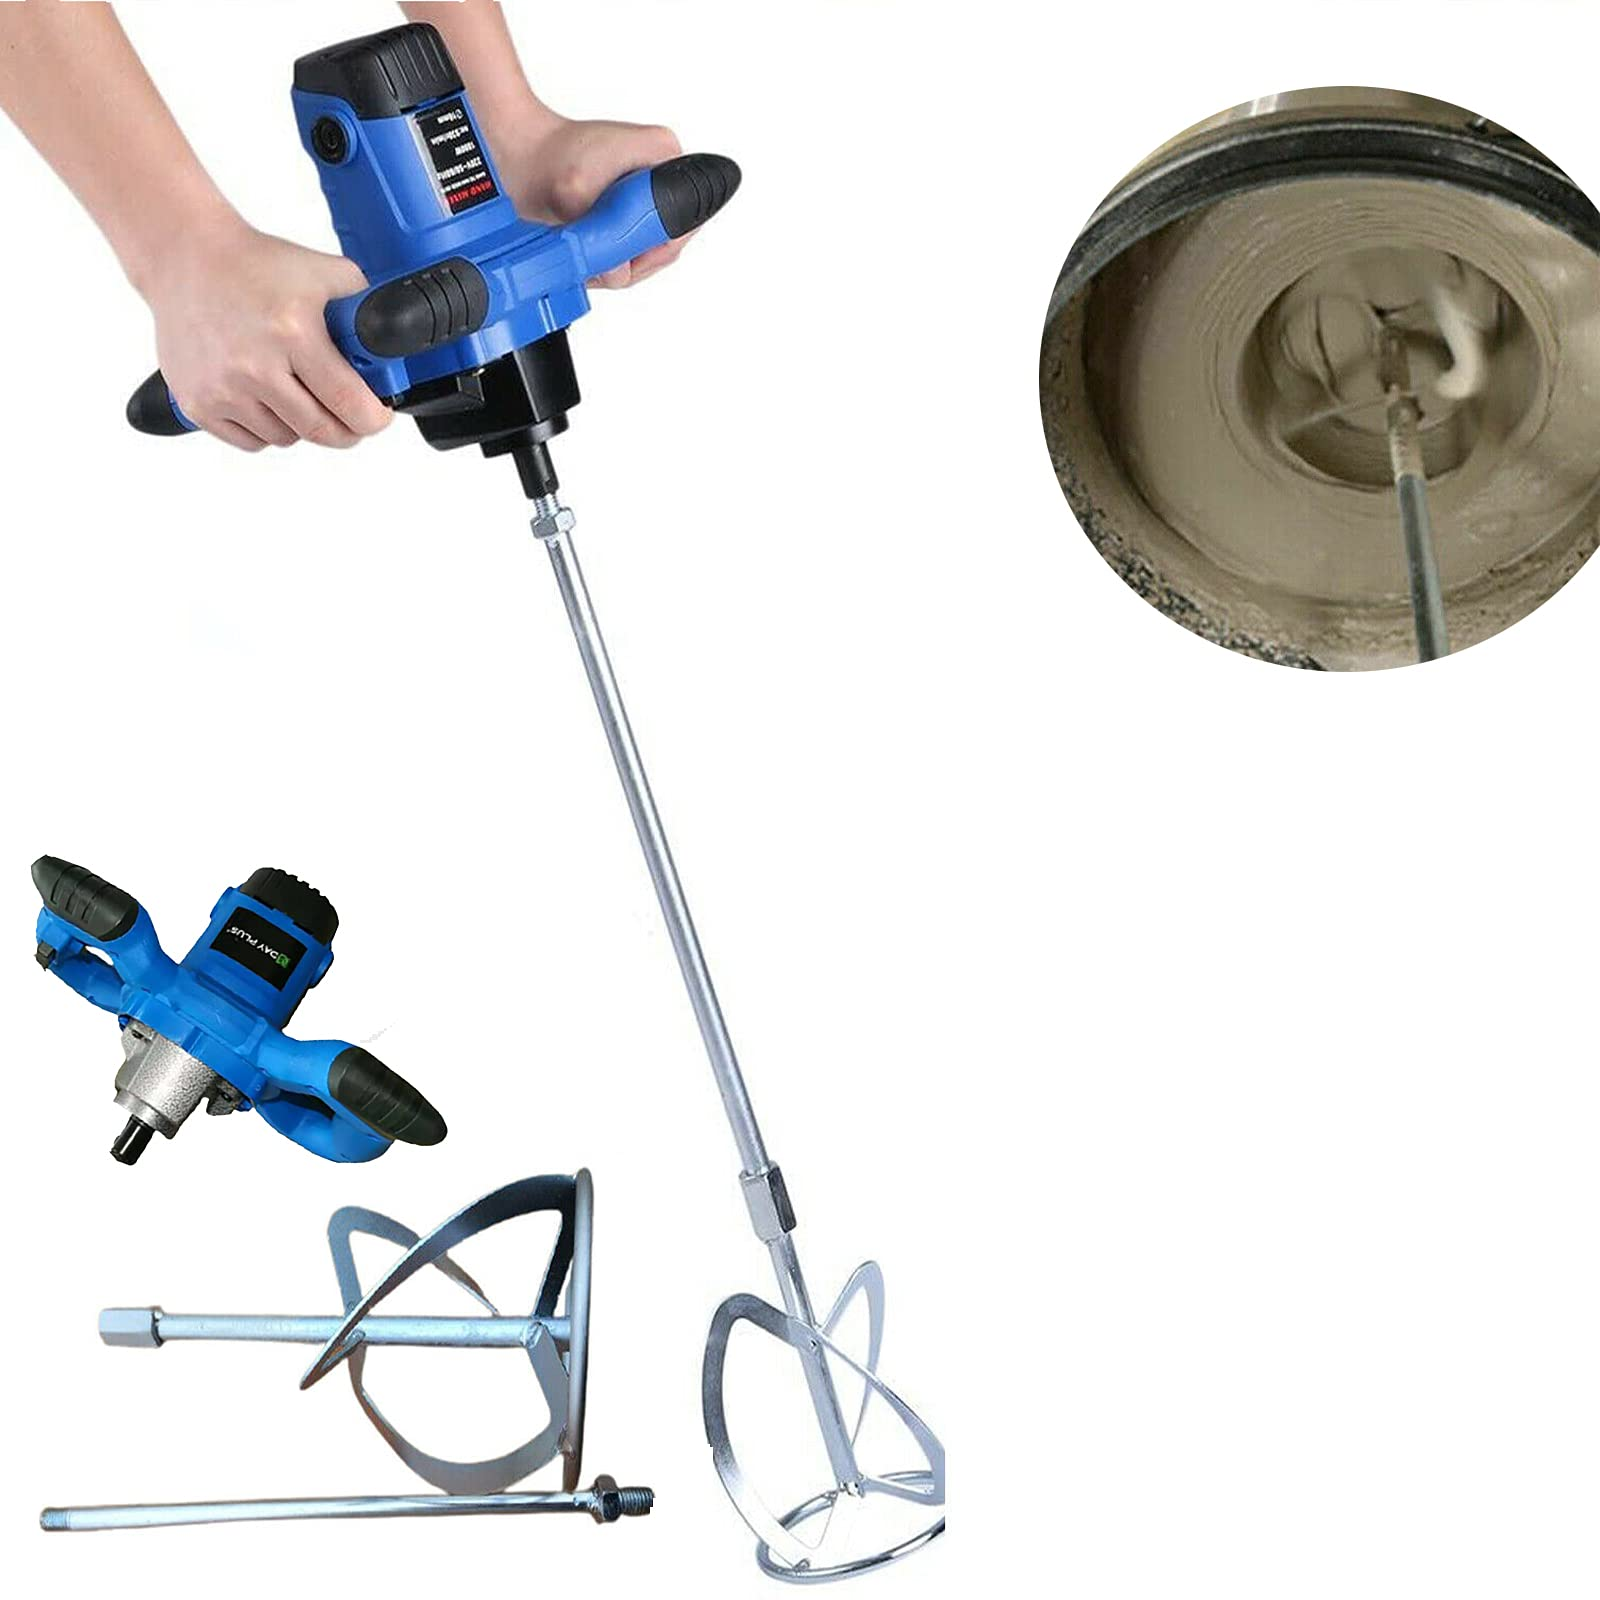 Efficiently mixing mud and grout with a drill mixer